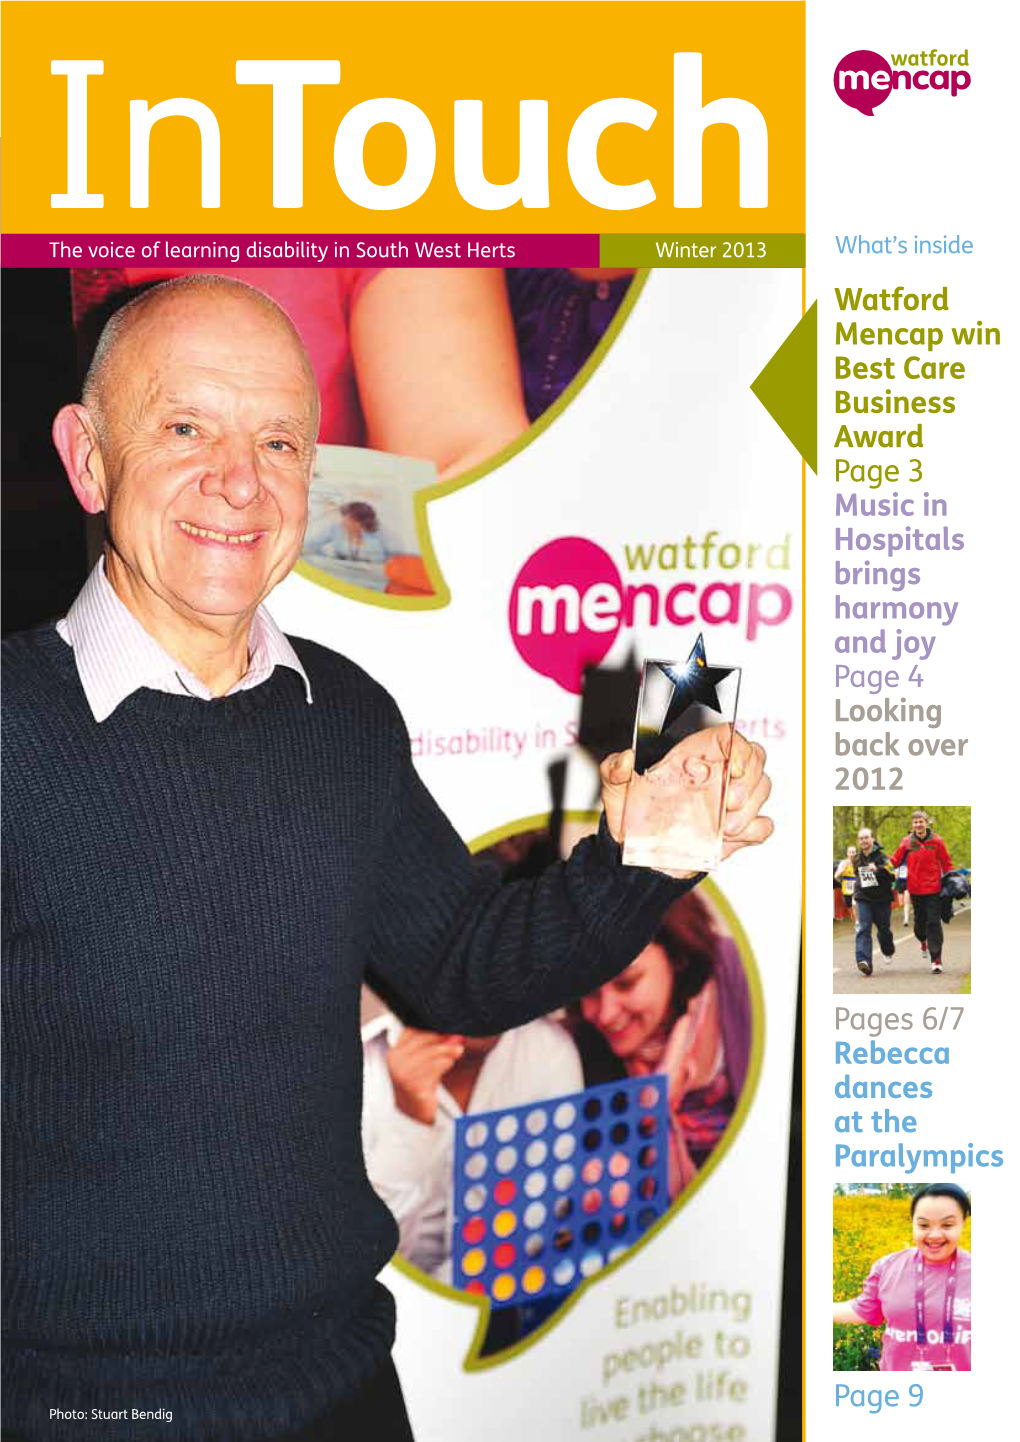 Watford Mencap Win Best Care Business Award Page 3 Music in Hospitals Brings Harmony and Joy Page 4 Looking Back Over 2012